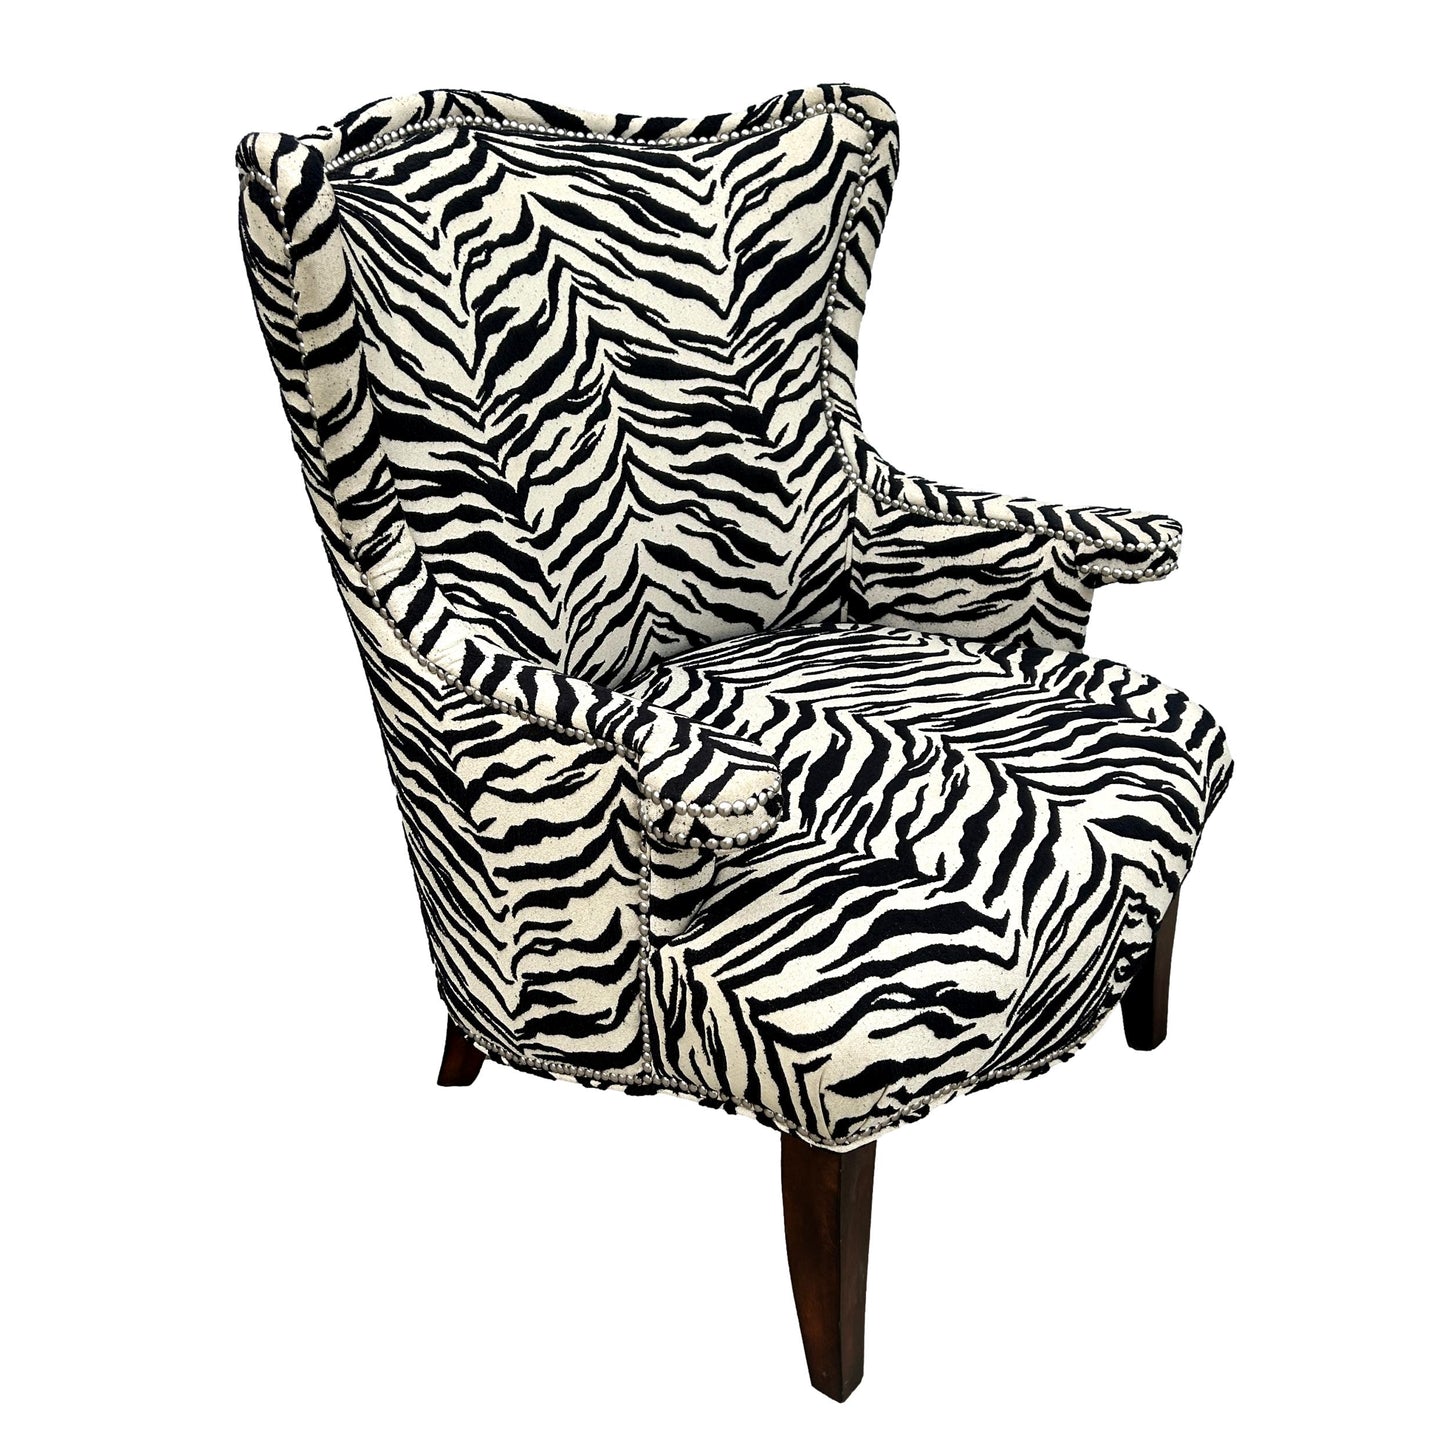 Pair of Zebra Wingback Chairs w/ Nailhead Accents